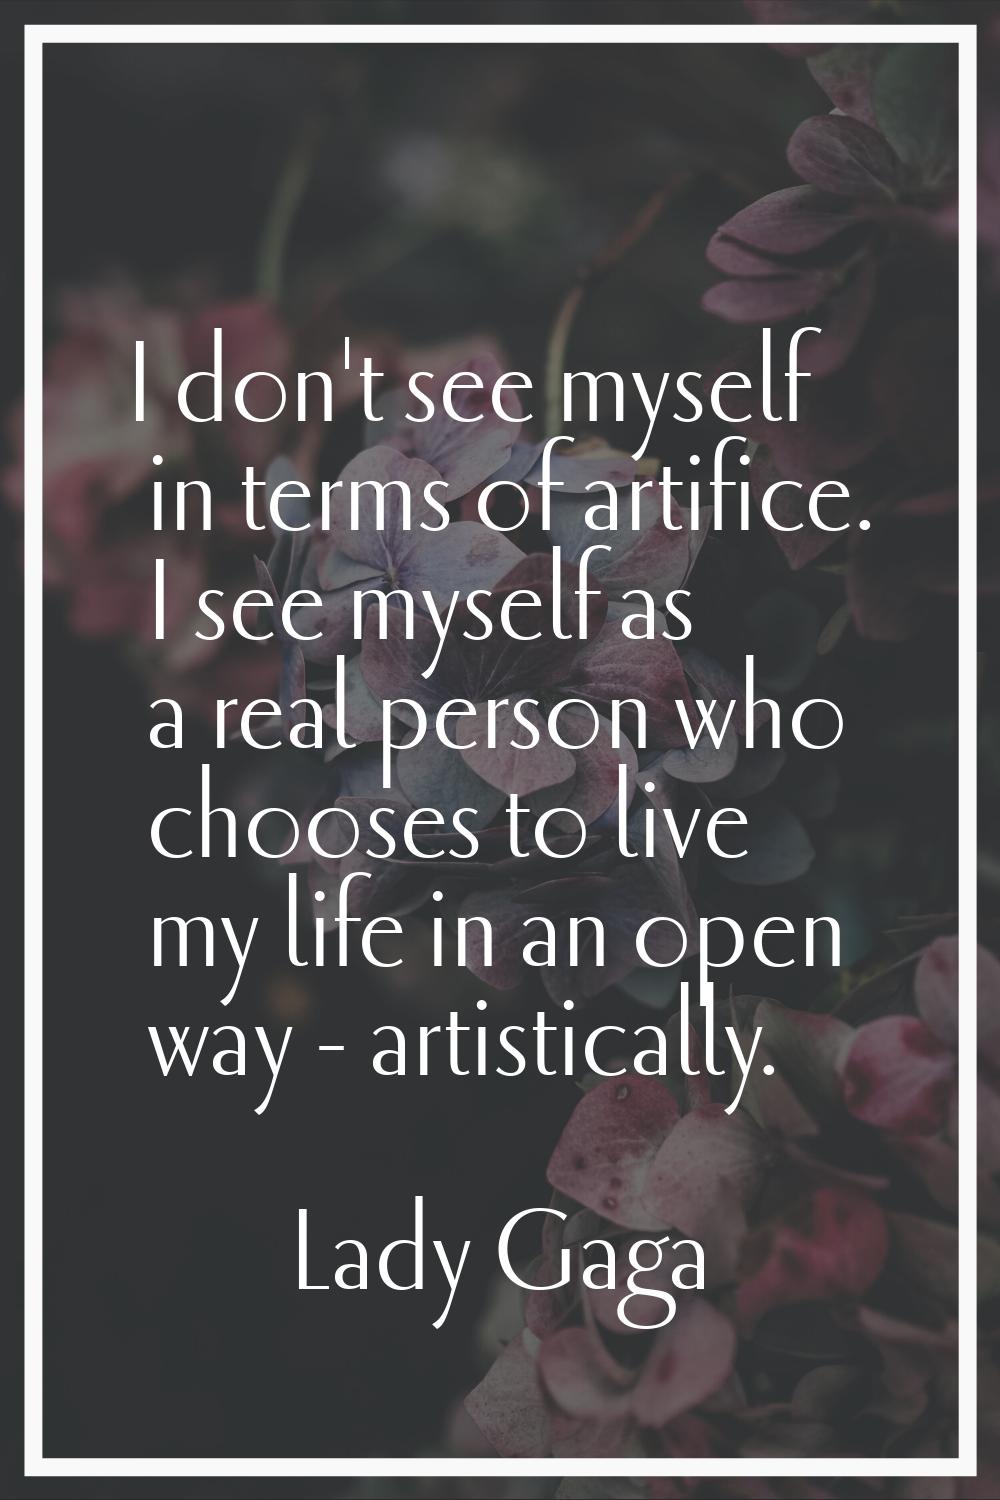 I don't see myself in terms of artifice. I see myself as a real person who chooses to live my life 